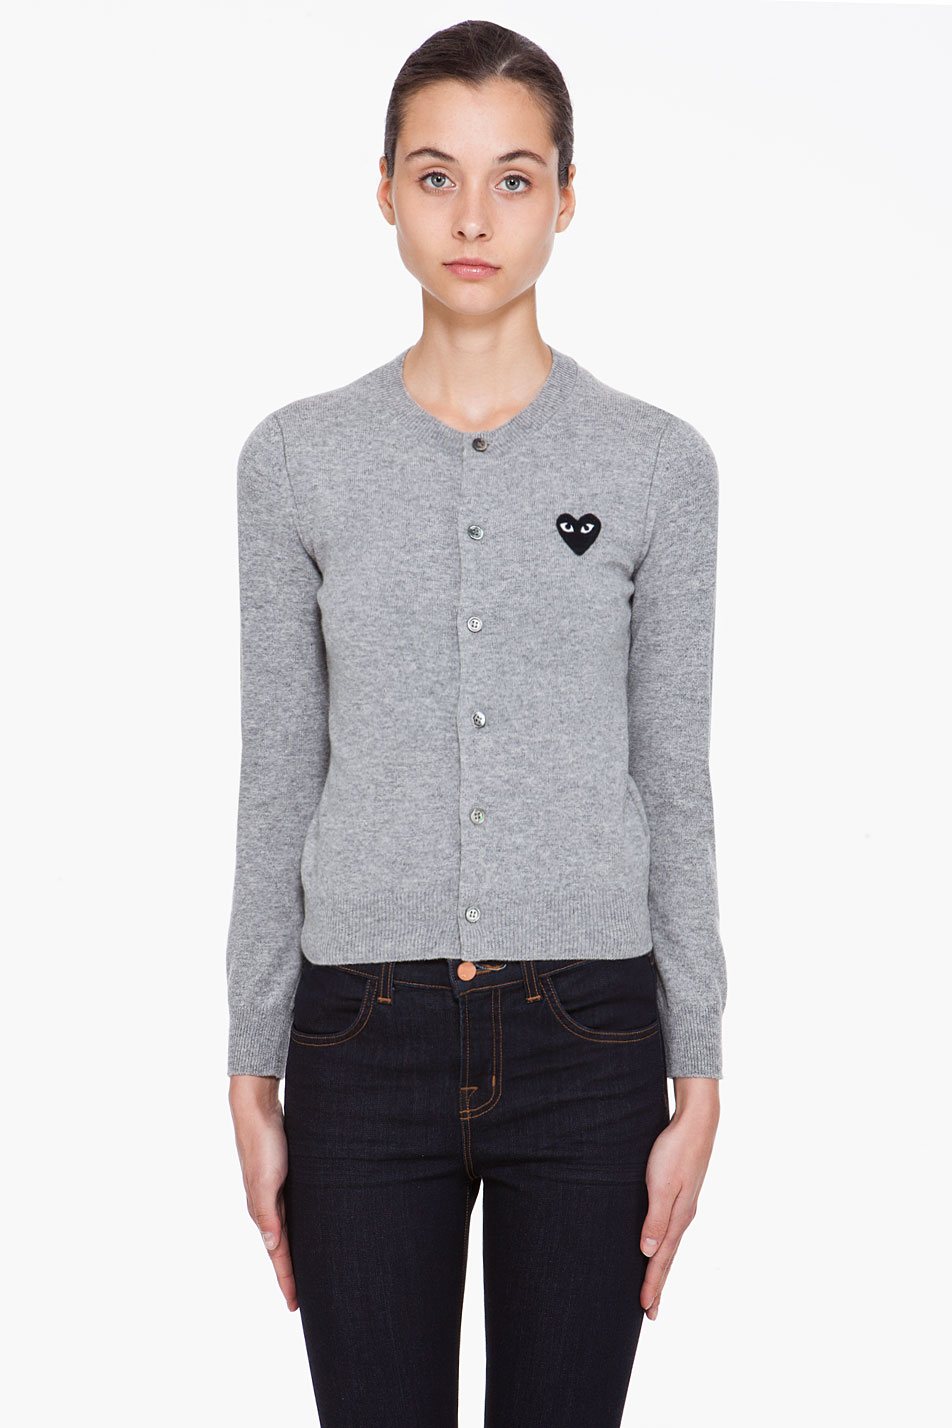 Lyst - Play Comme Des Garçons Grey Patch Cardigan in Gray